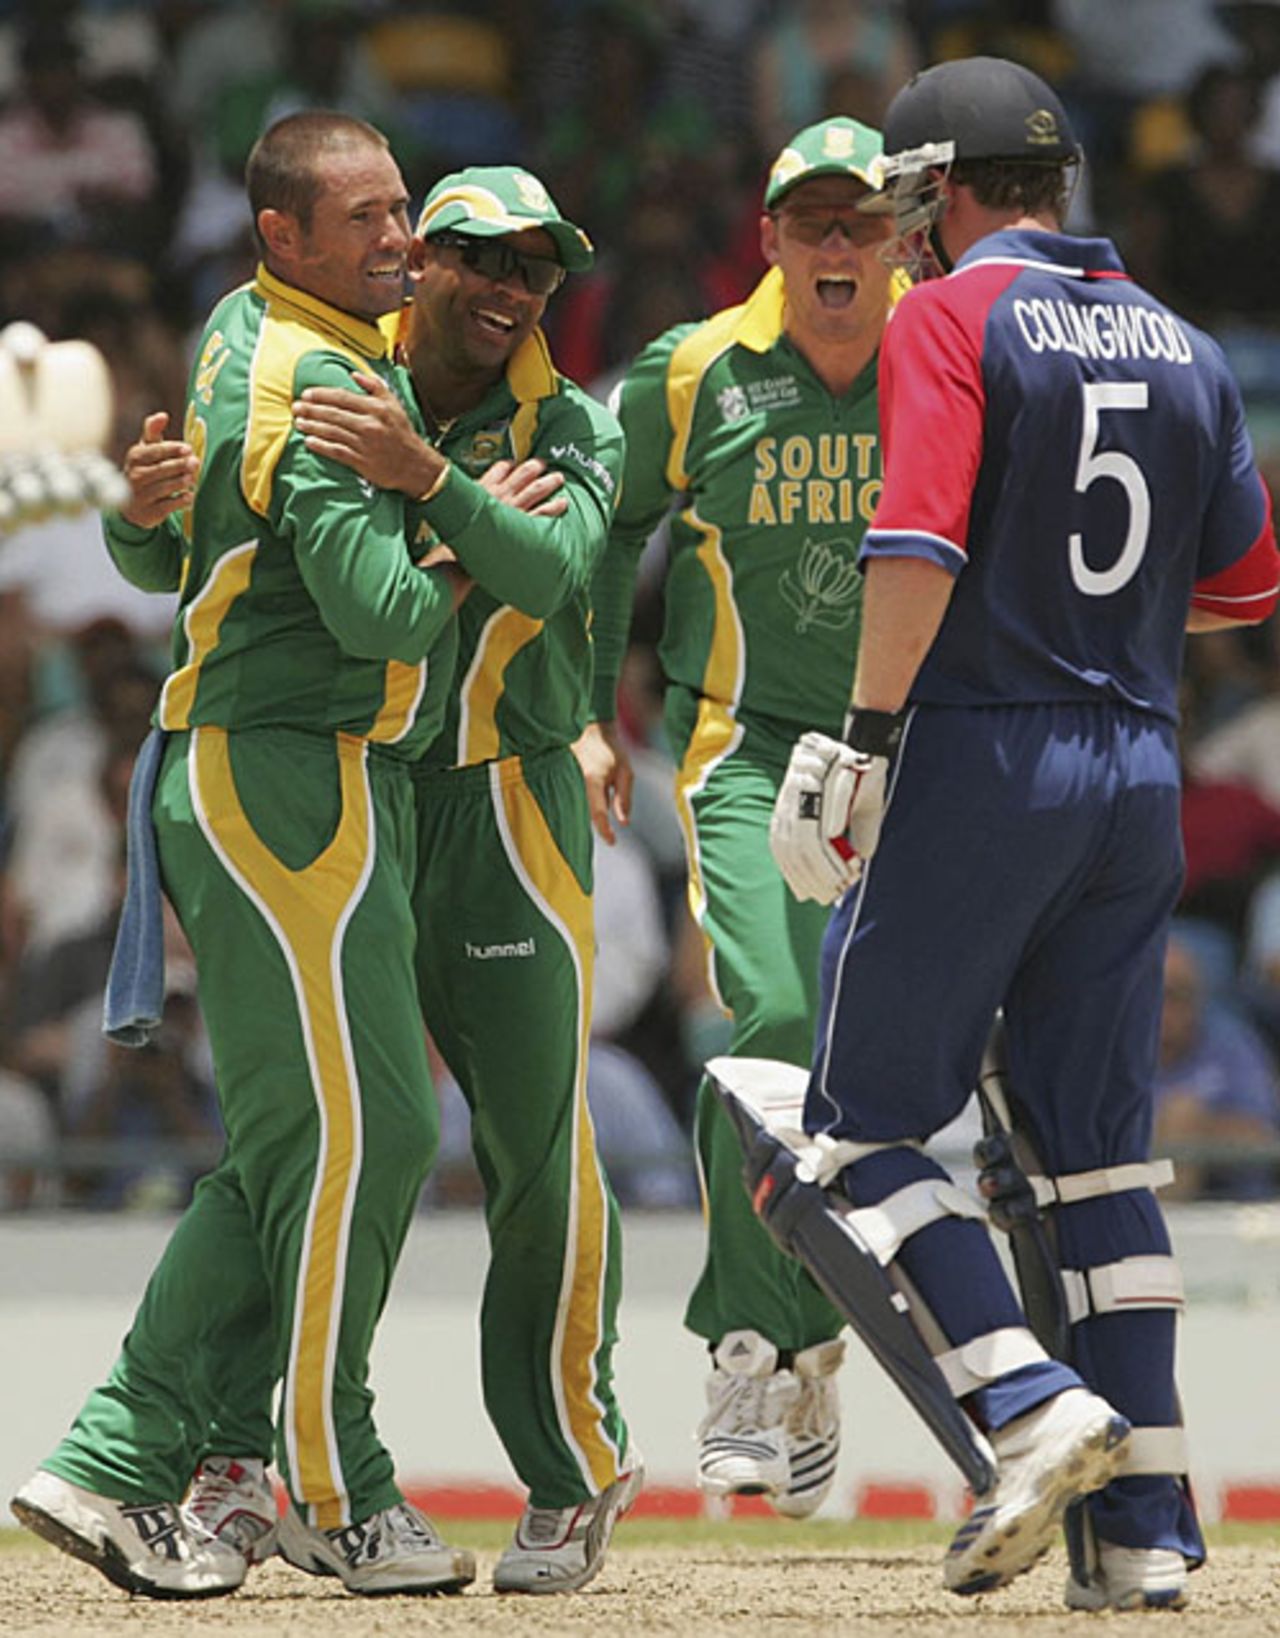 Andrew Hall shows his delight after dismissing Paul Collingwood, England v South Africa, Super Eights, Barbados, April 17, 2007